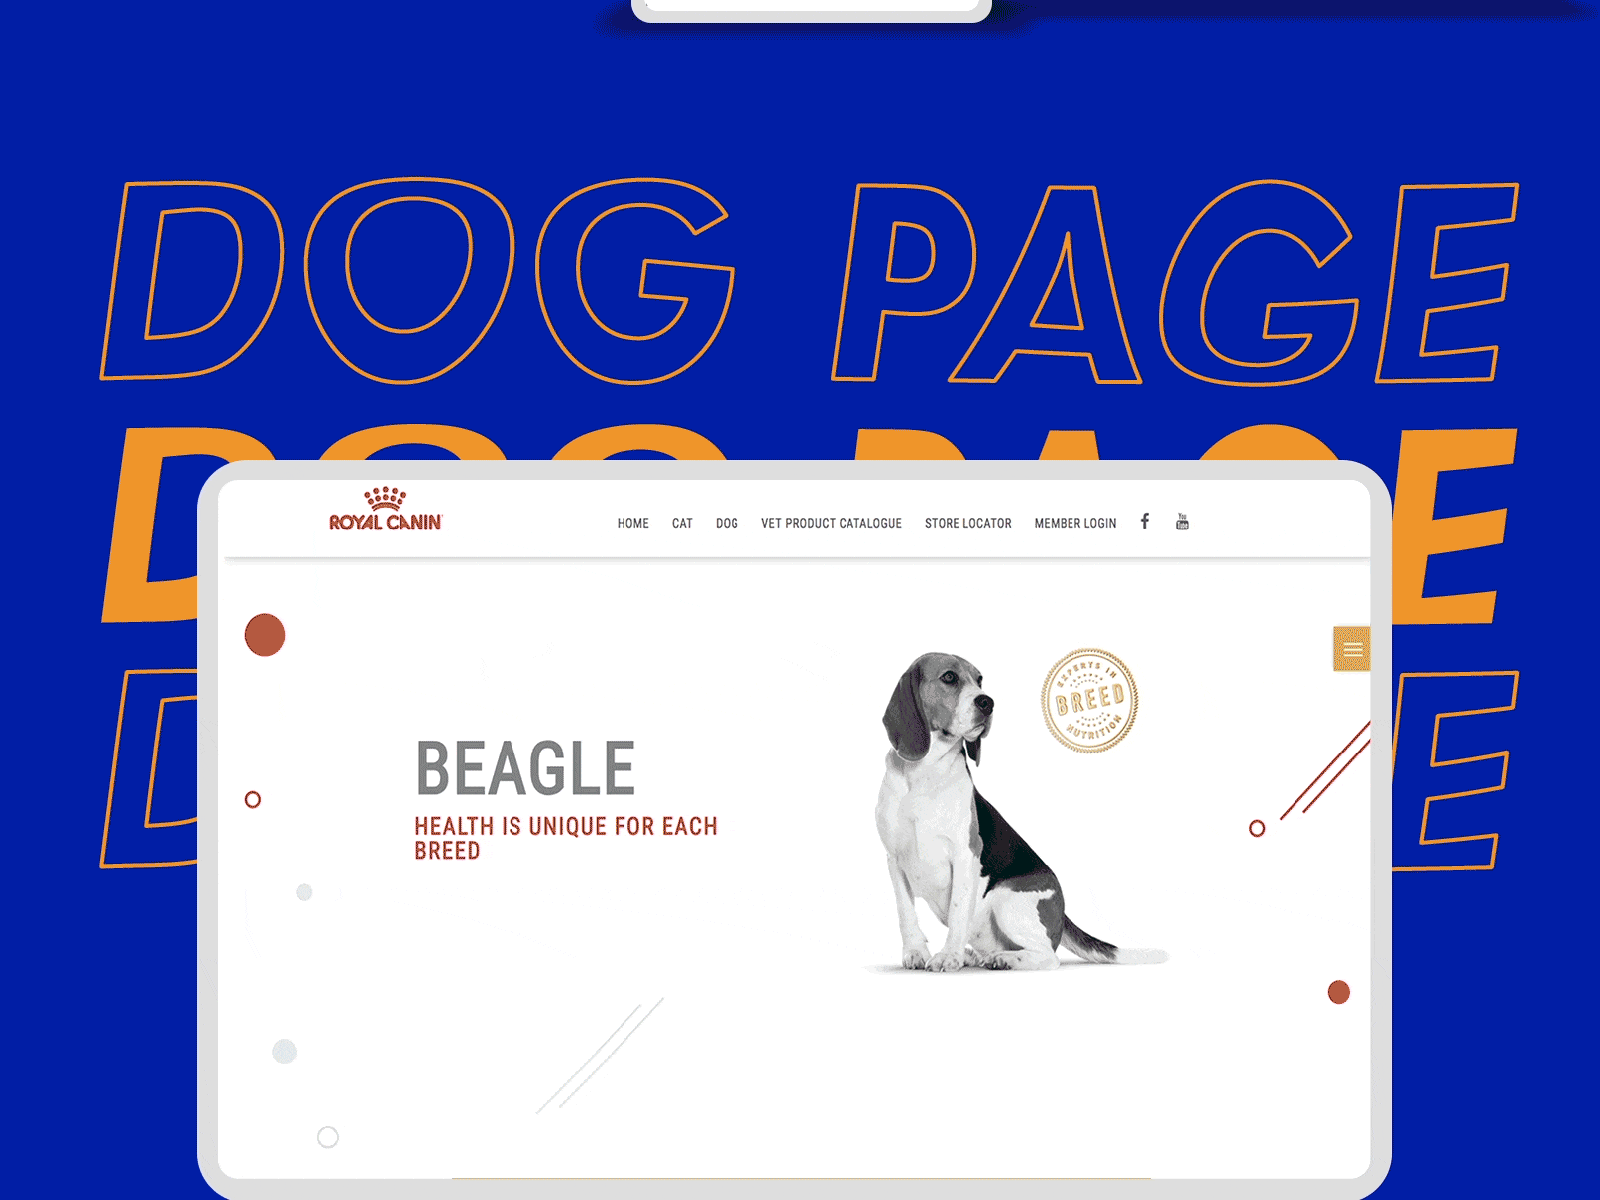 Royal Canin breed campaign microsite responsive design for dog breed page viewed on desktop